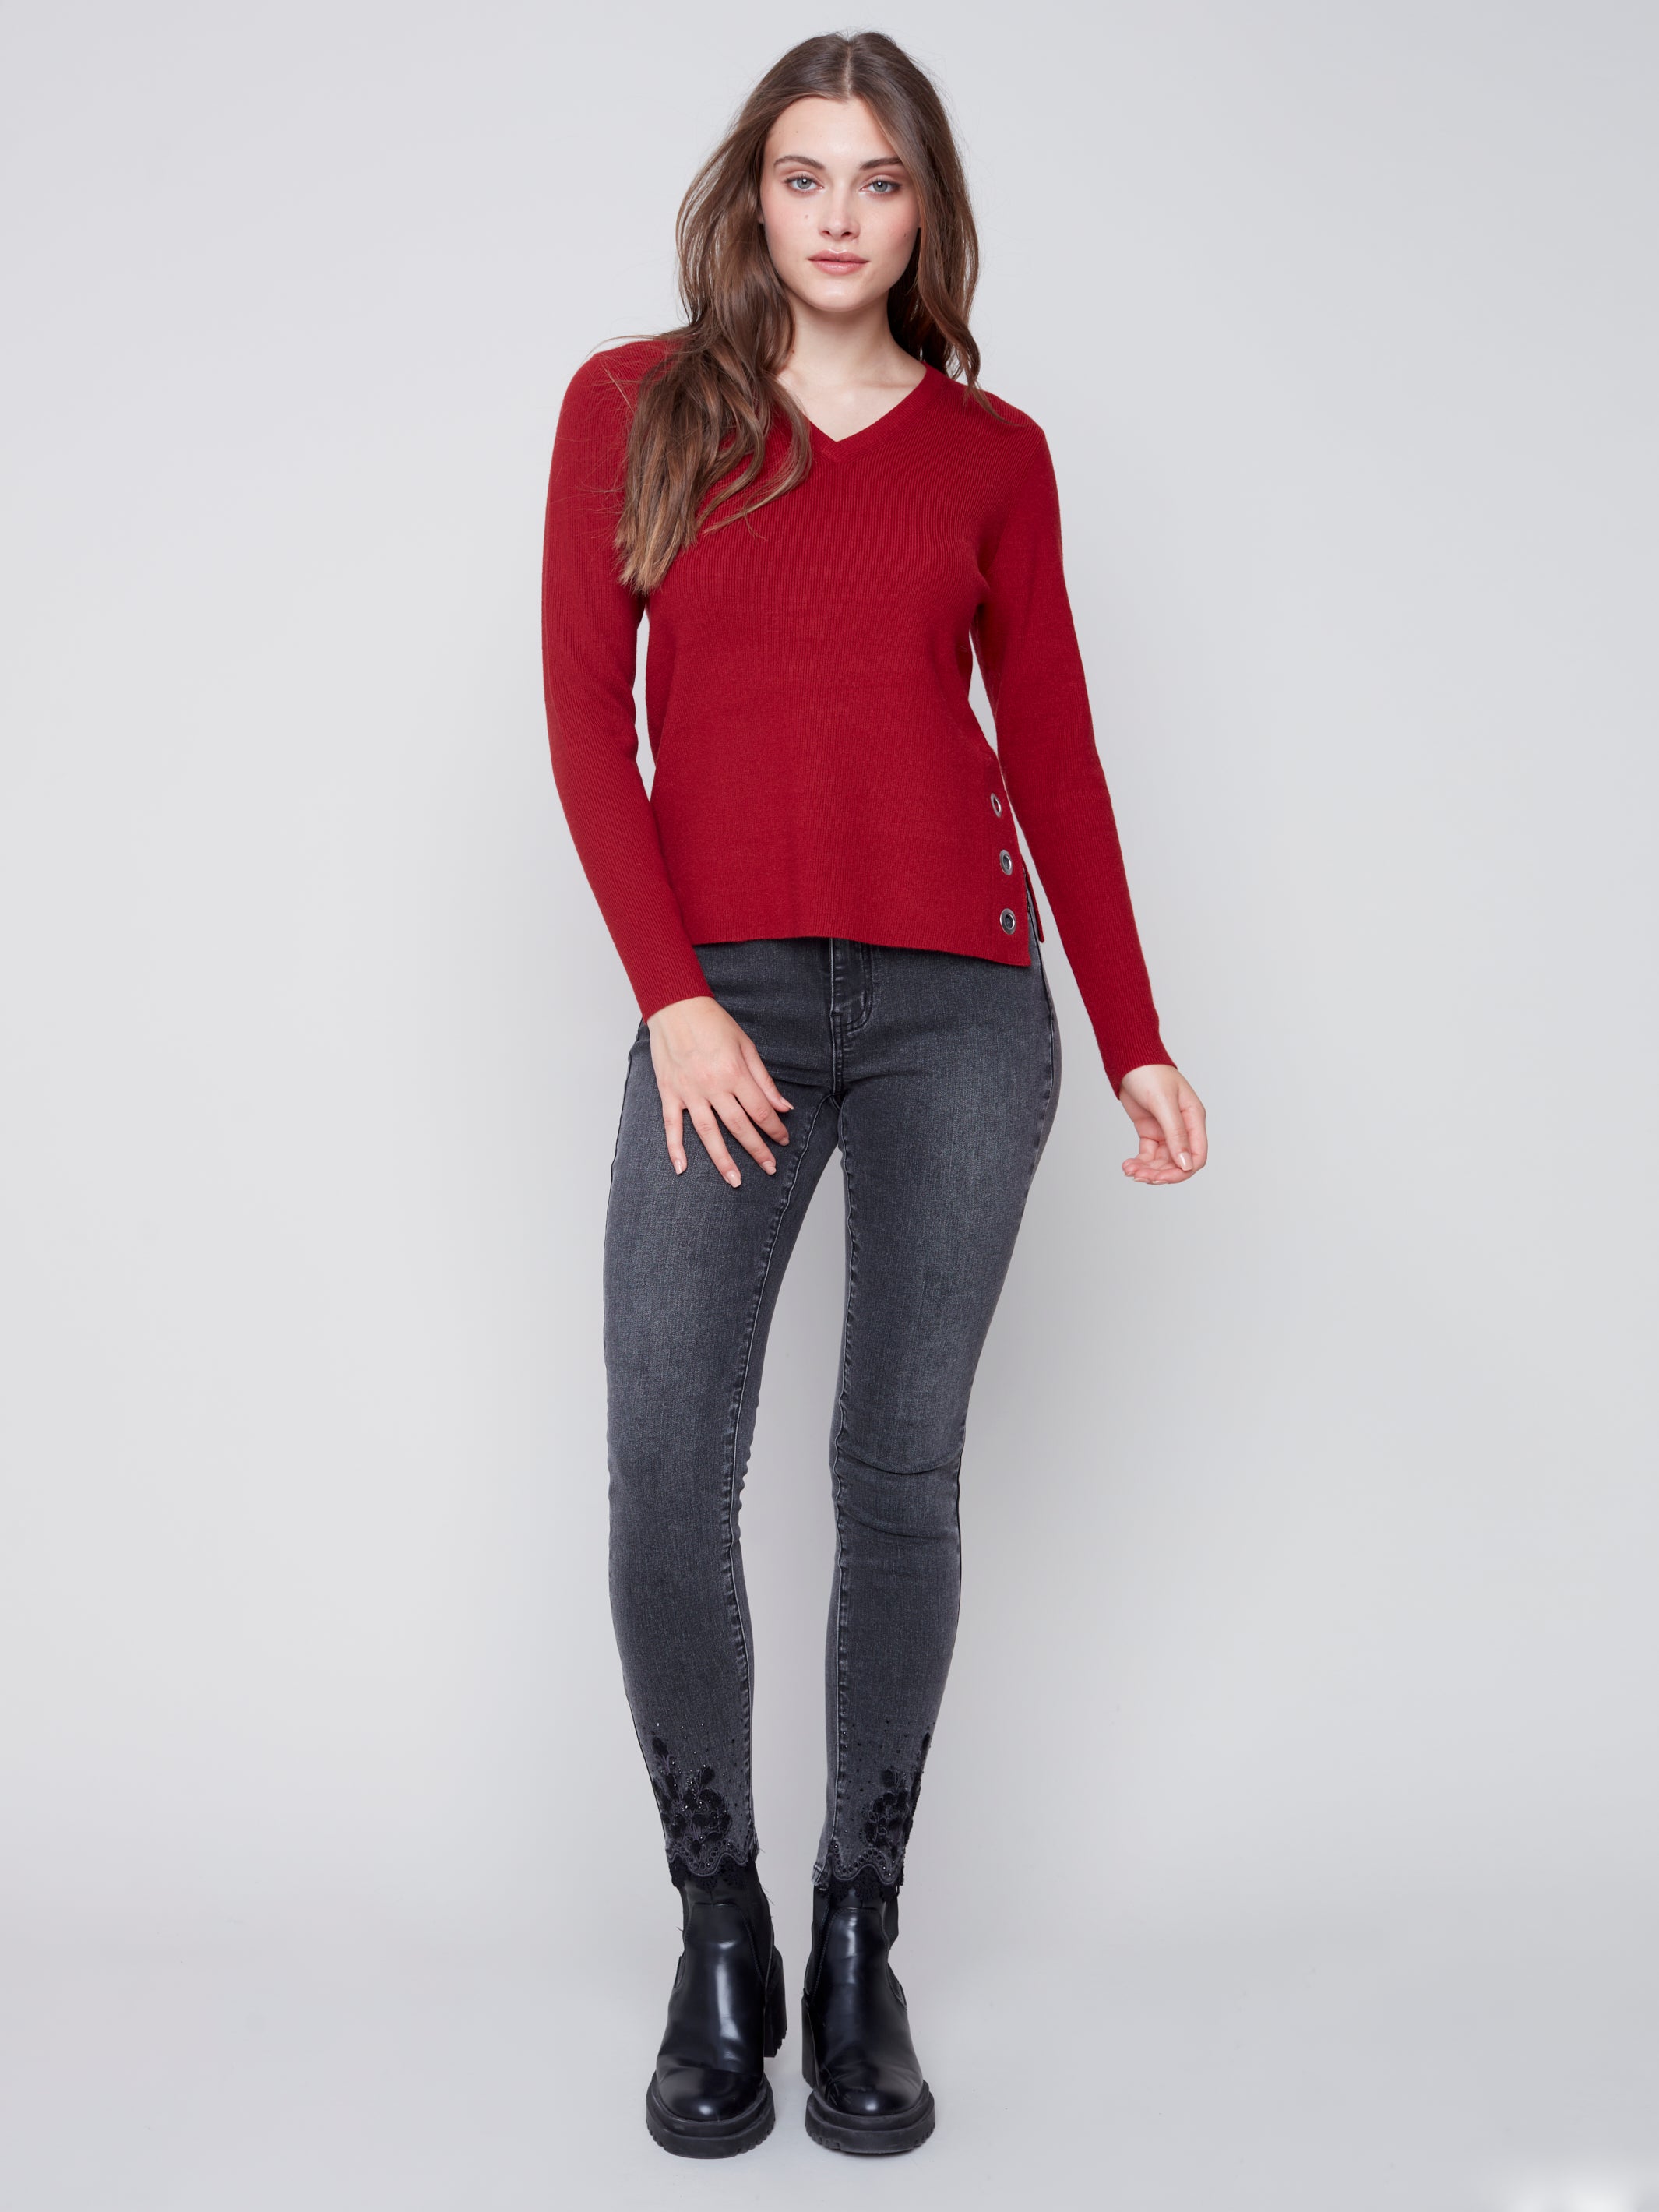 Charlie B Knit V-Neck Sweater with Grommet Detail